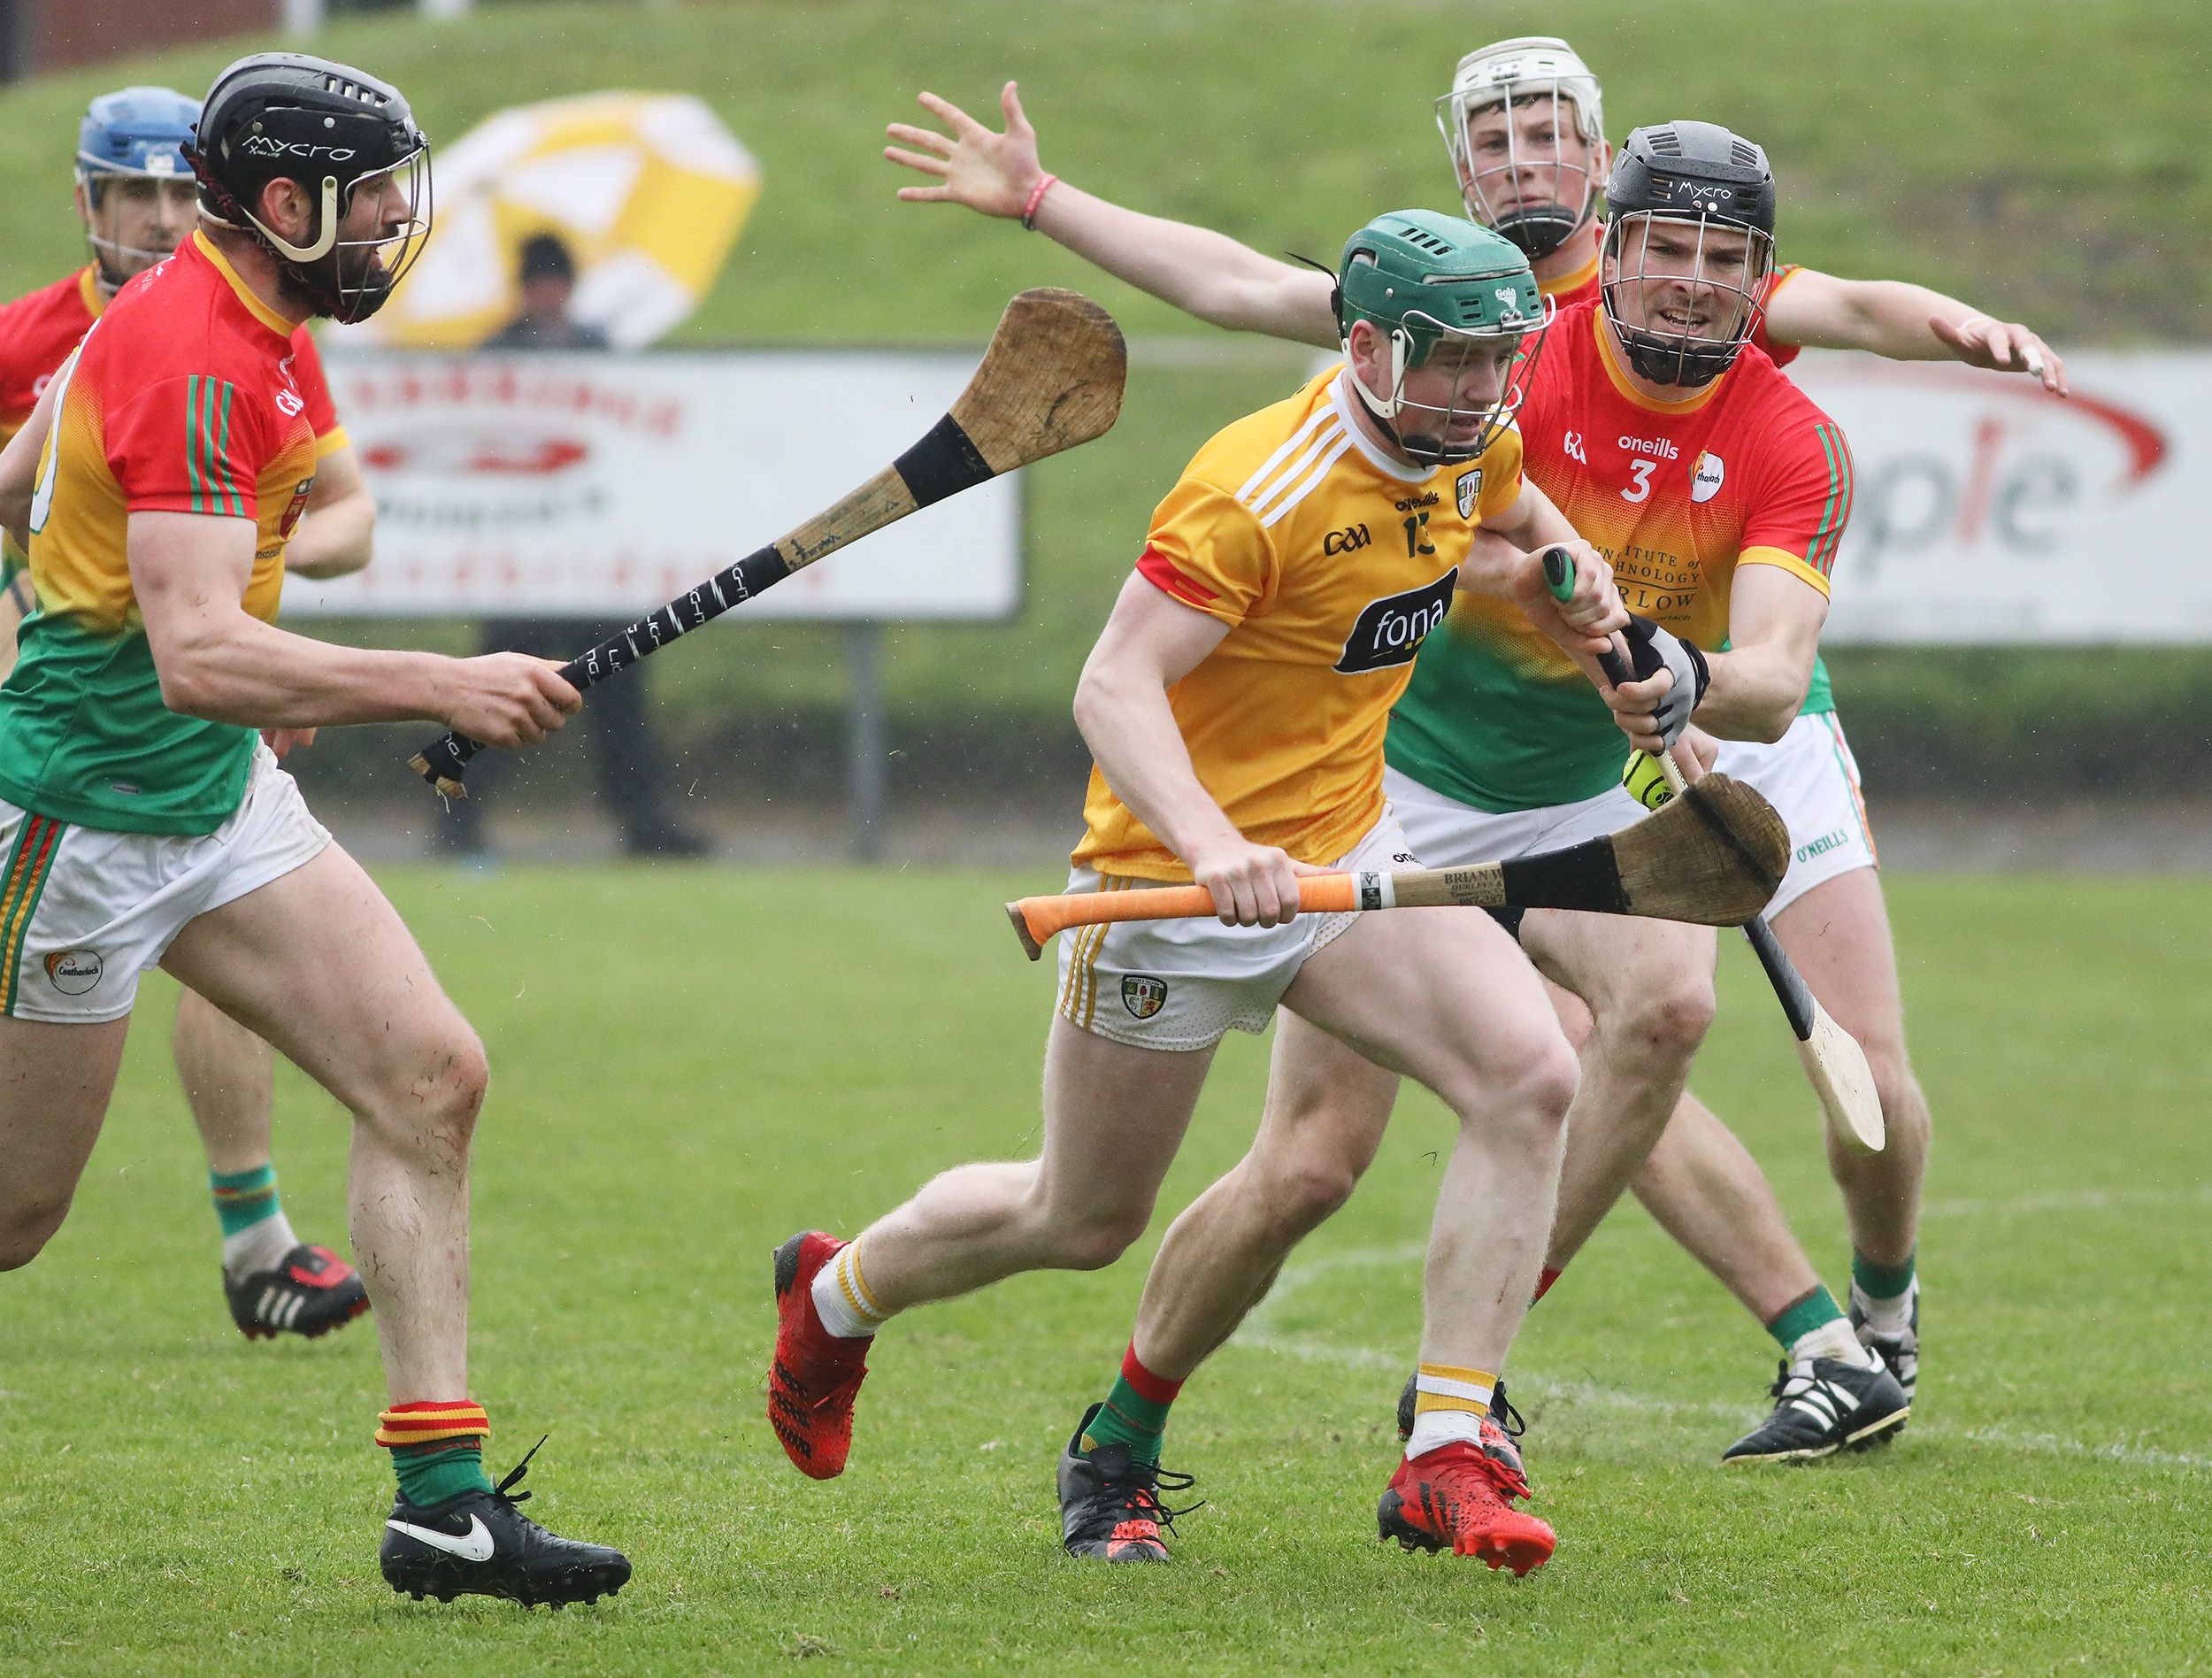 Conal Cunning is challenged by Conor Lawlor at Corrigan Park on Saturday